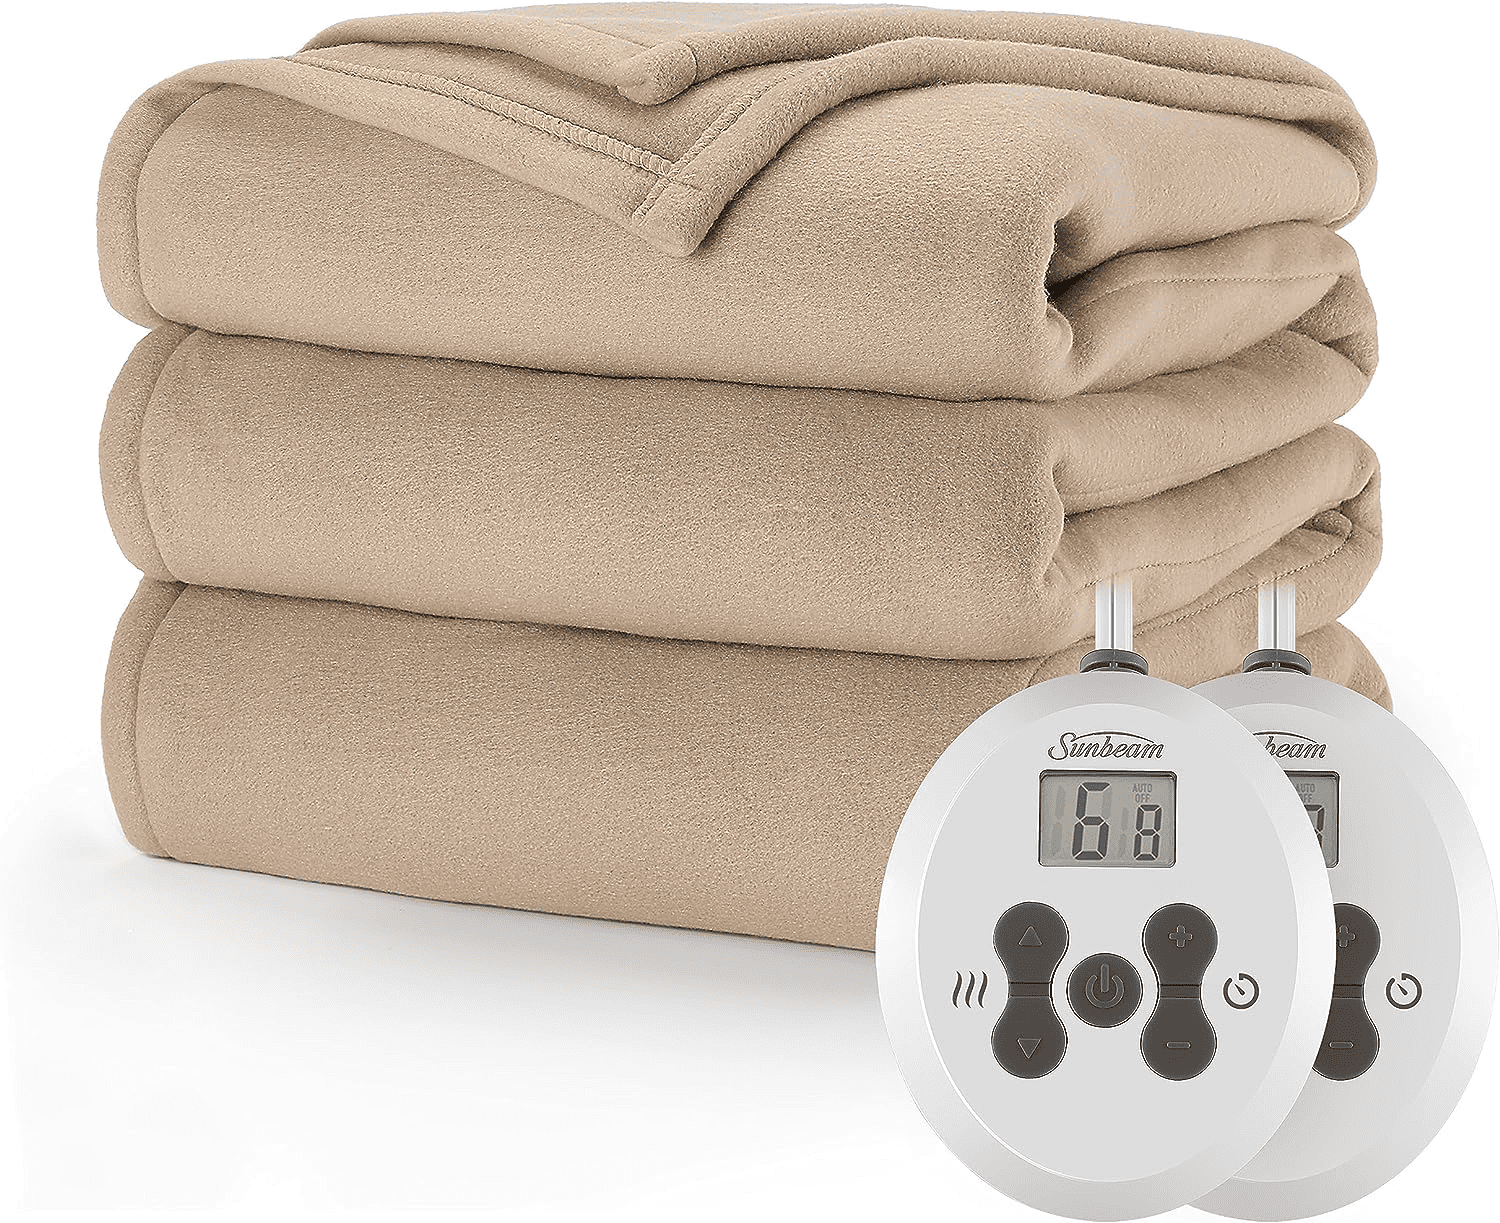 luxury electric blanket to stay warm, heated blanket, wires inside, digital controls, no more drafty house, power cord